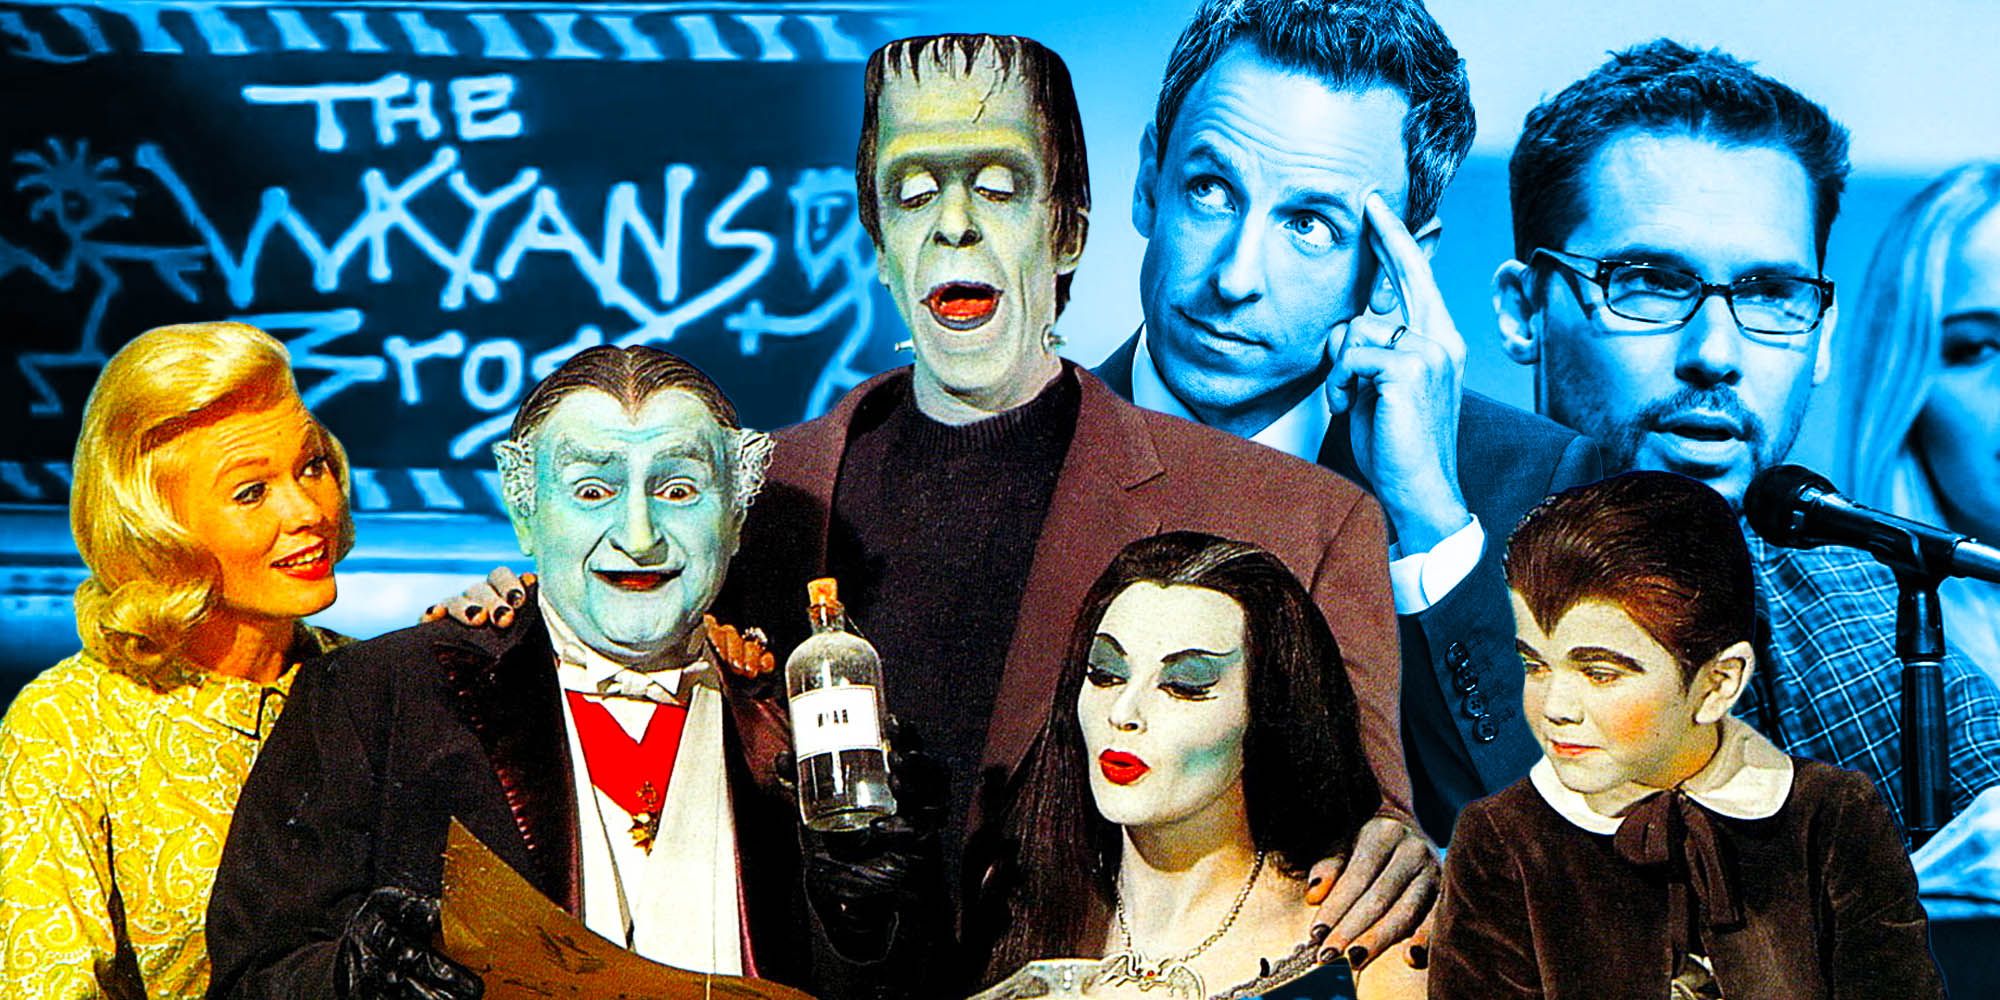 The munsters failed Reboots seth meyer brian singer The wayans brothers